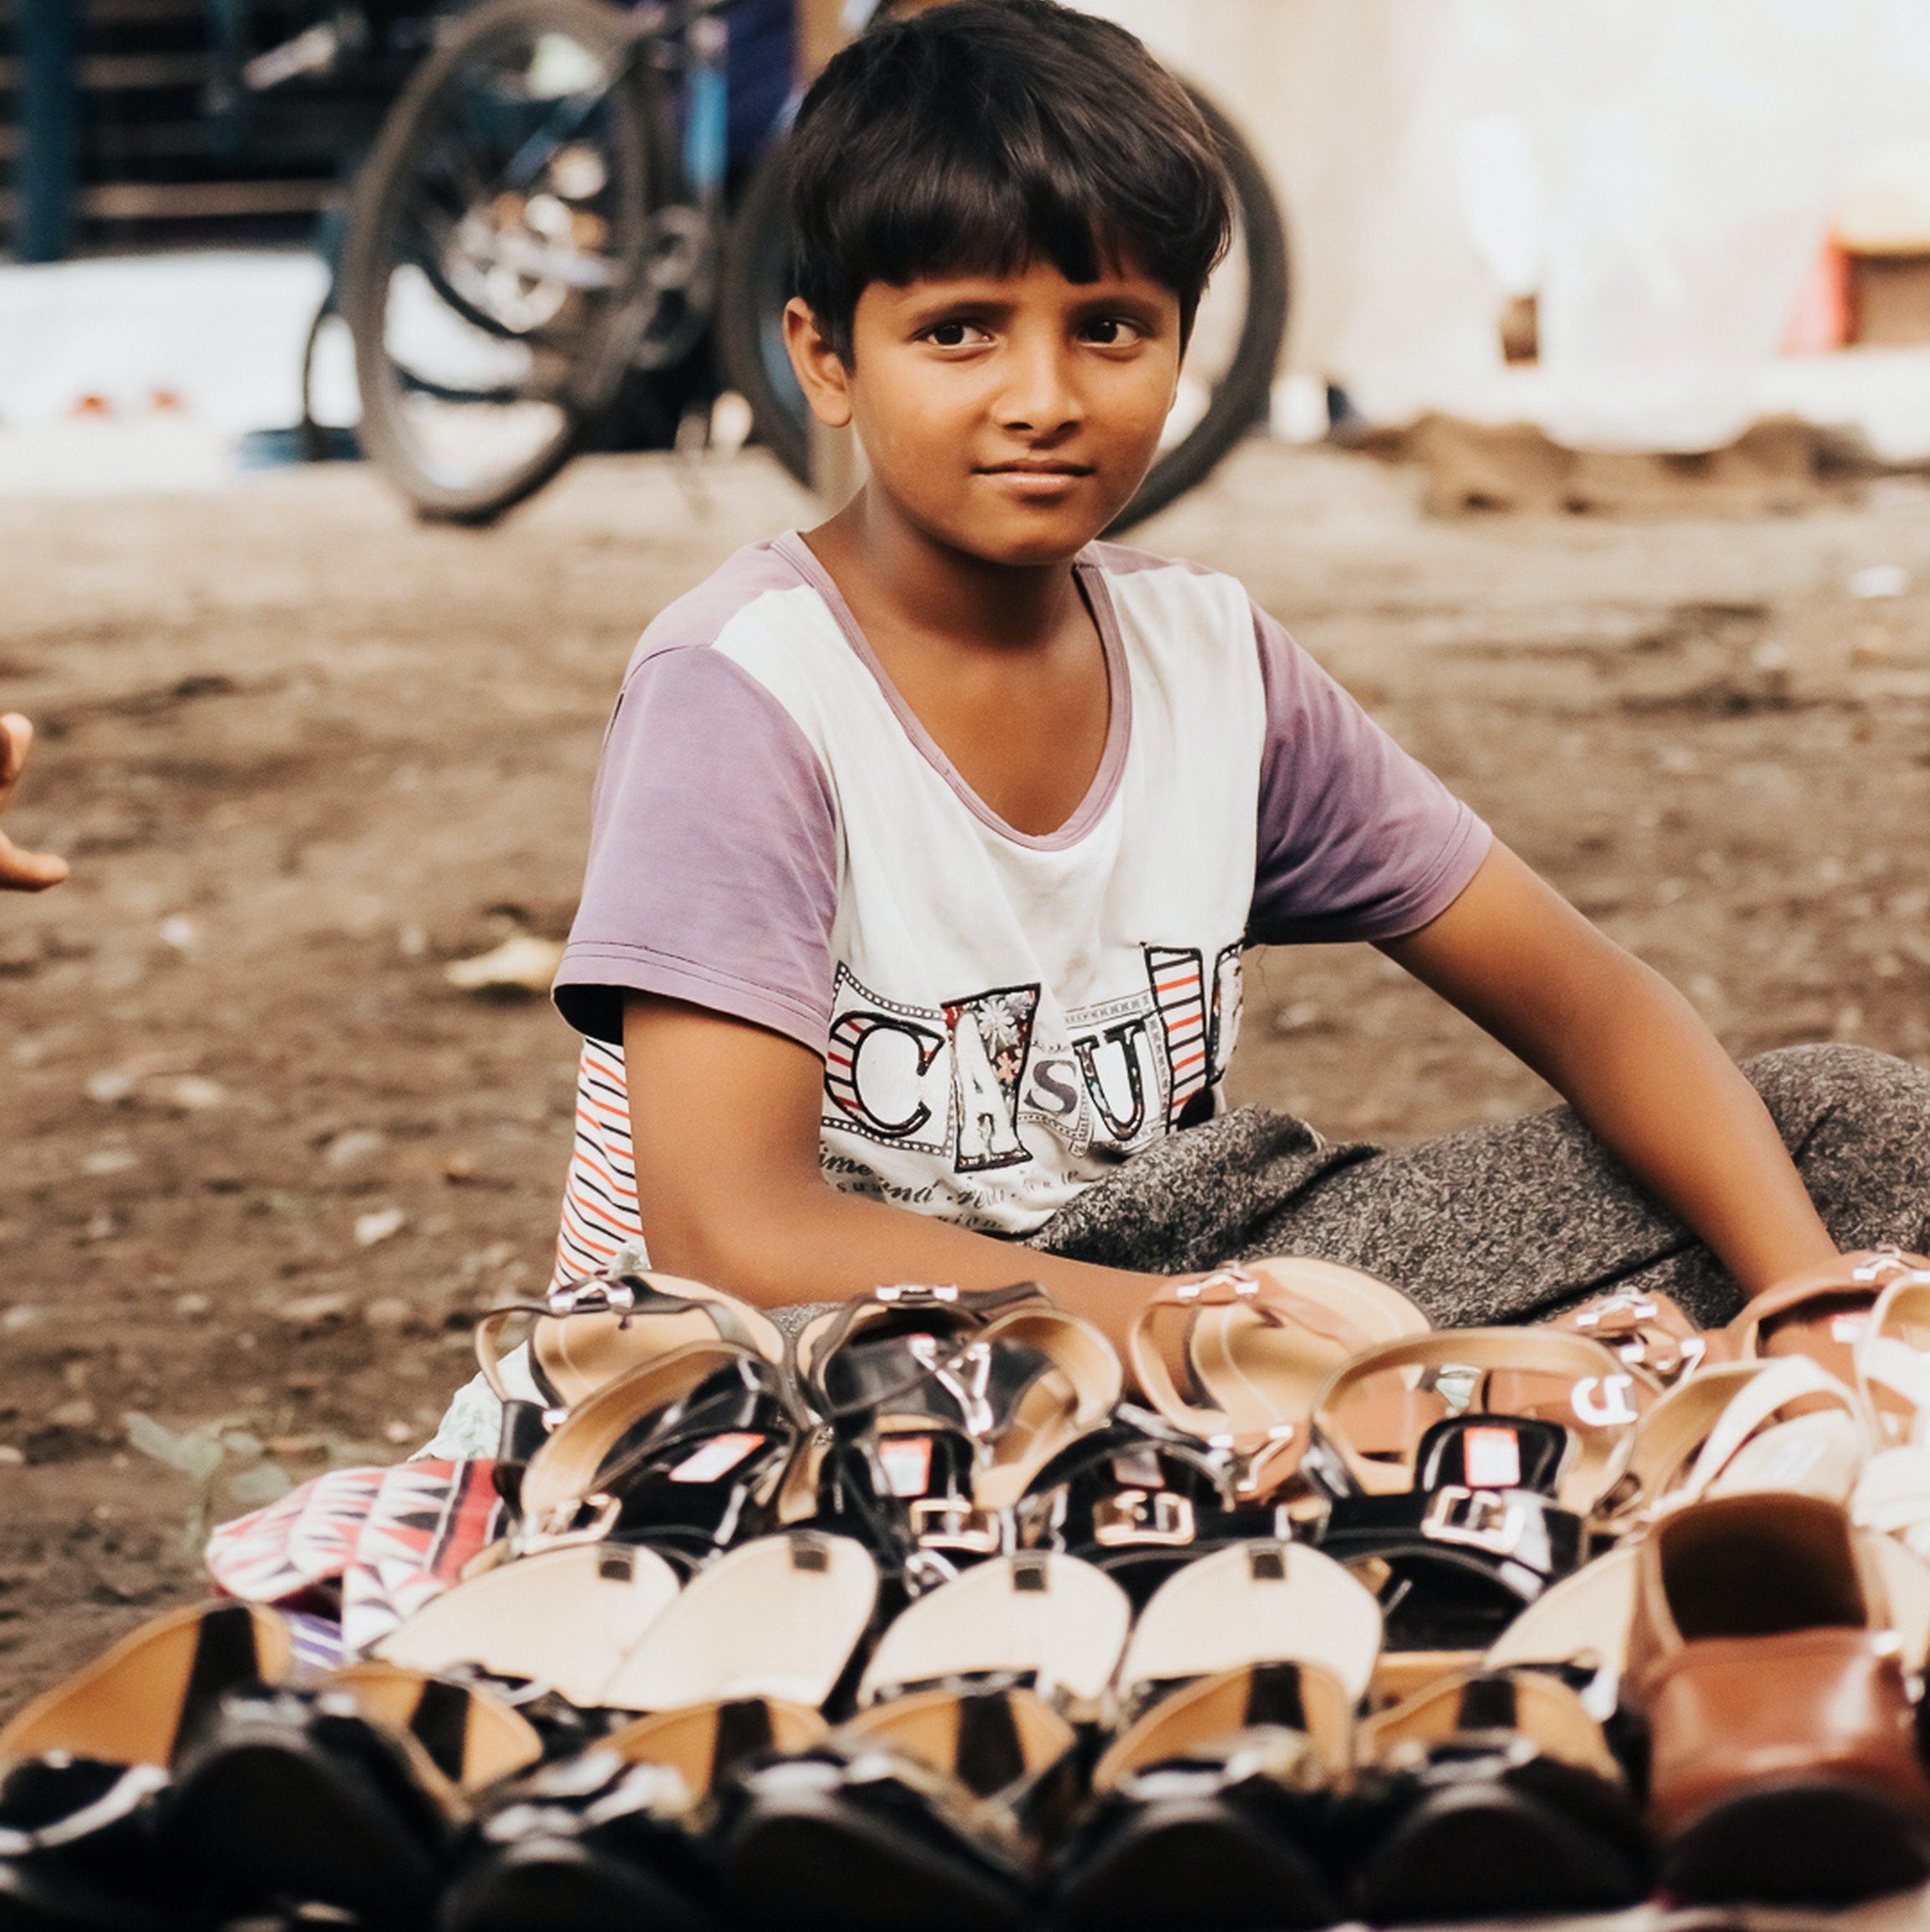 A child selling shoes at a market stall.